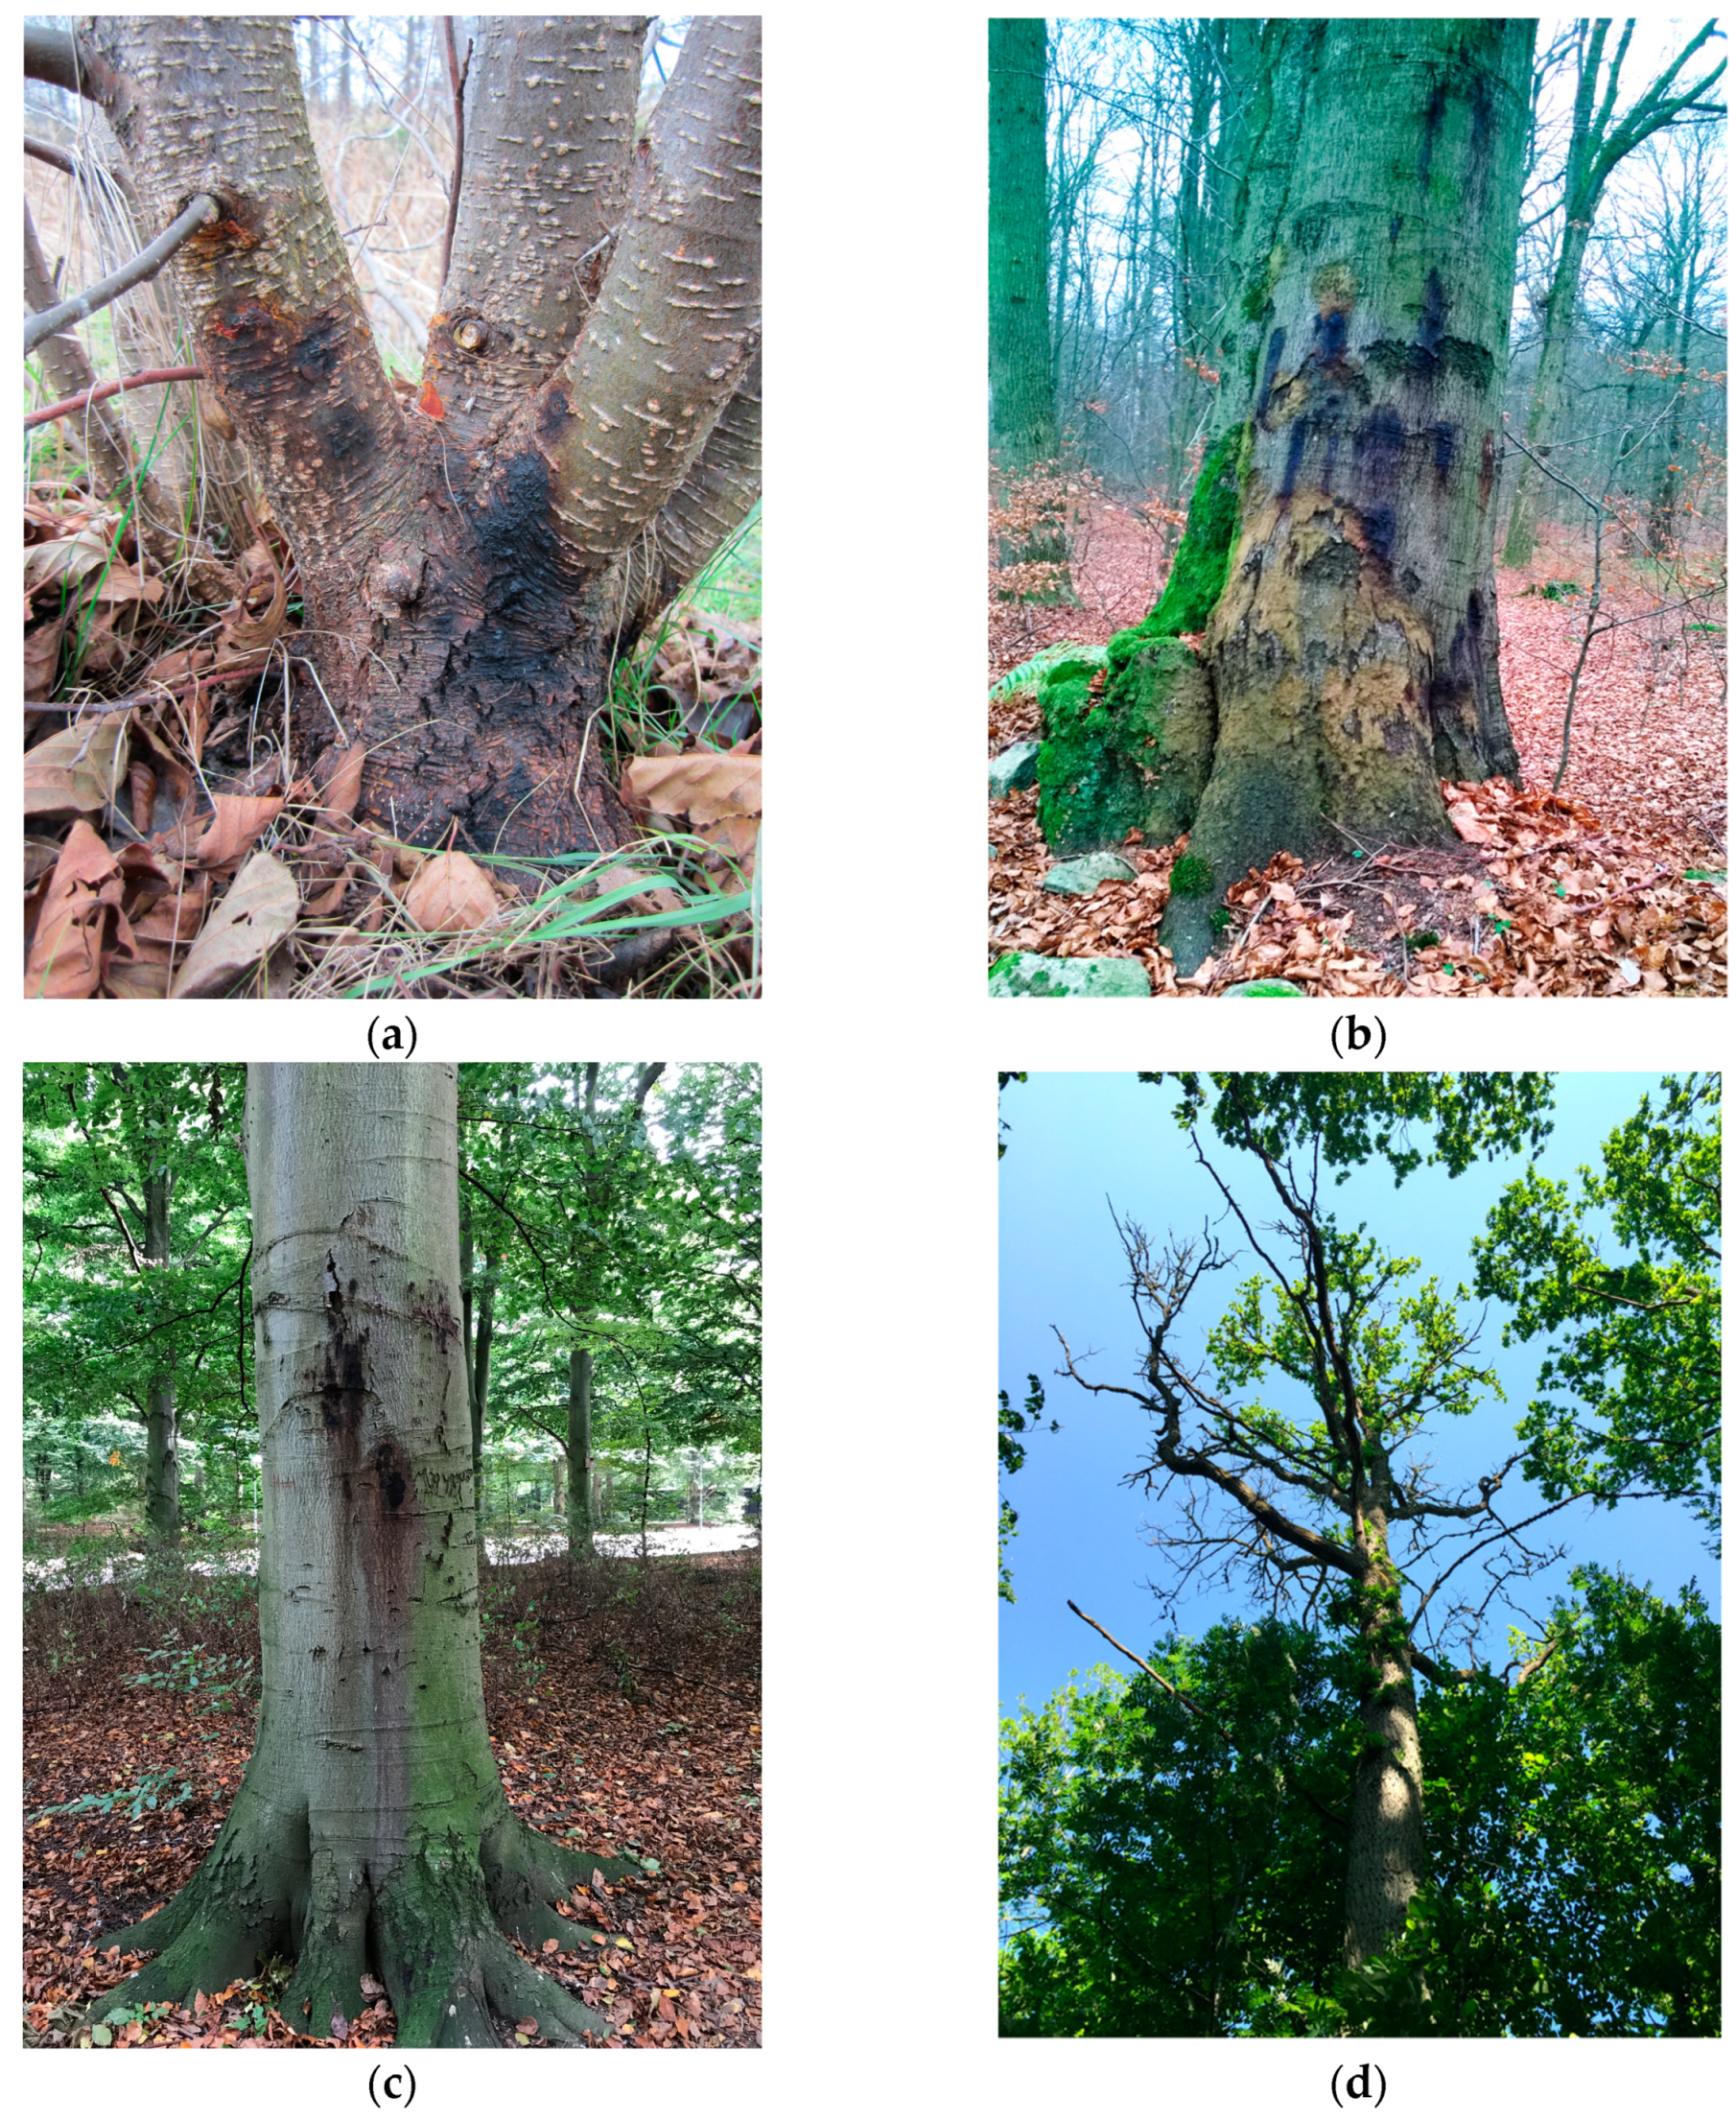 The numbers of woody plants with maximum crown width in a specific size